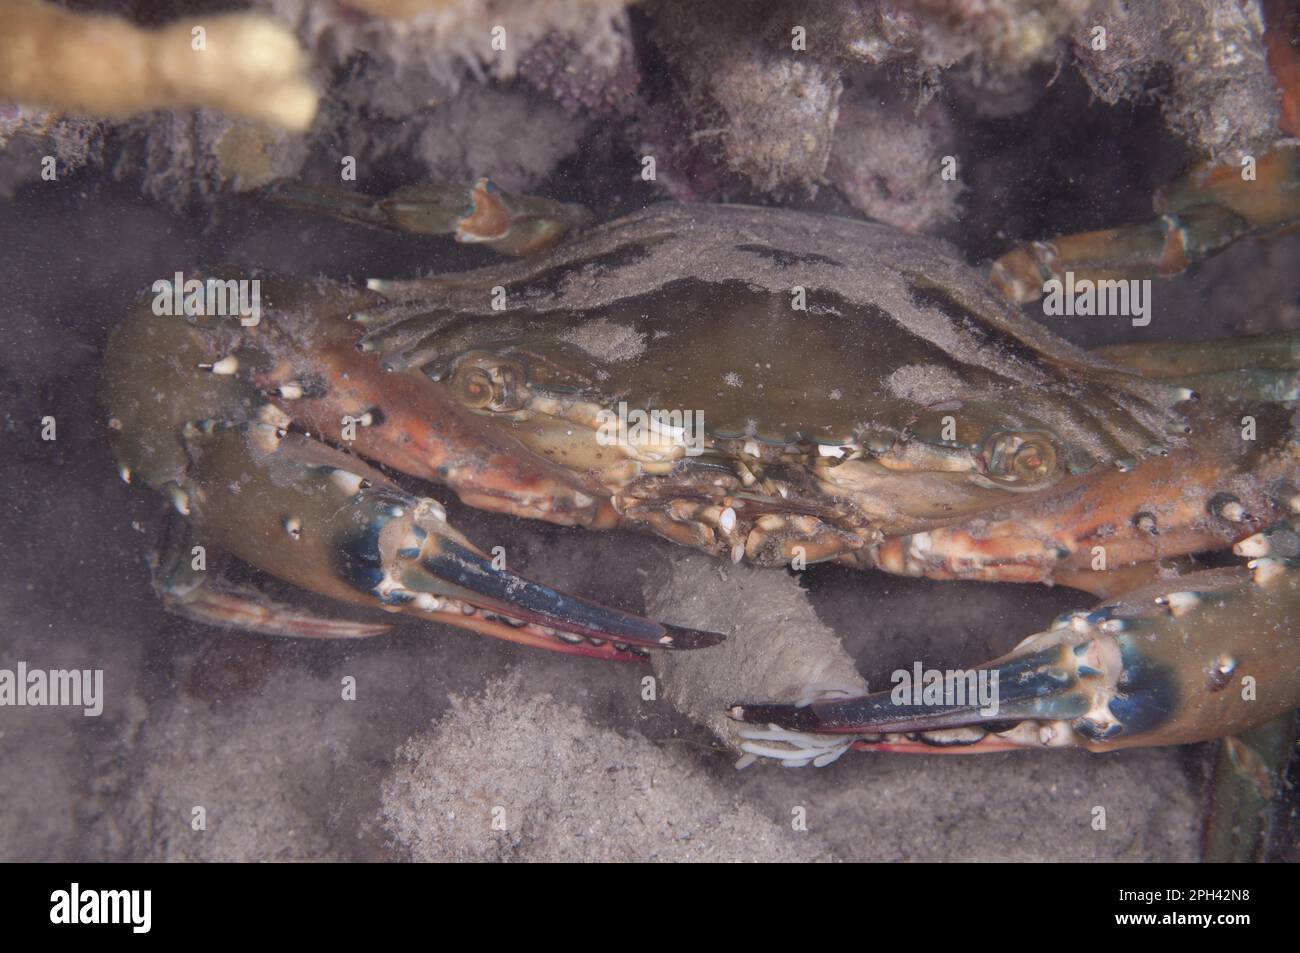 Saw-clawed spoon crab (Etisus utilis) adult, feeds on the light-sensitive sea cucumber (Holothuria impatiens) at night, Lembata Island, Solor Stock Photo